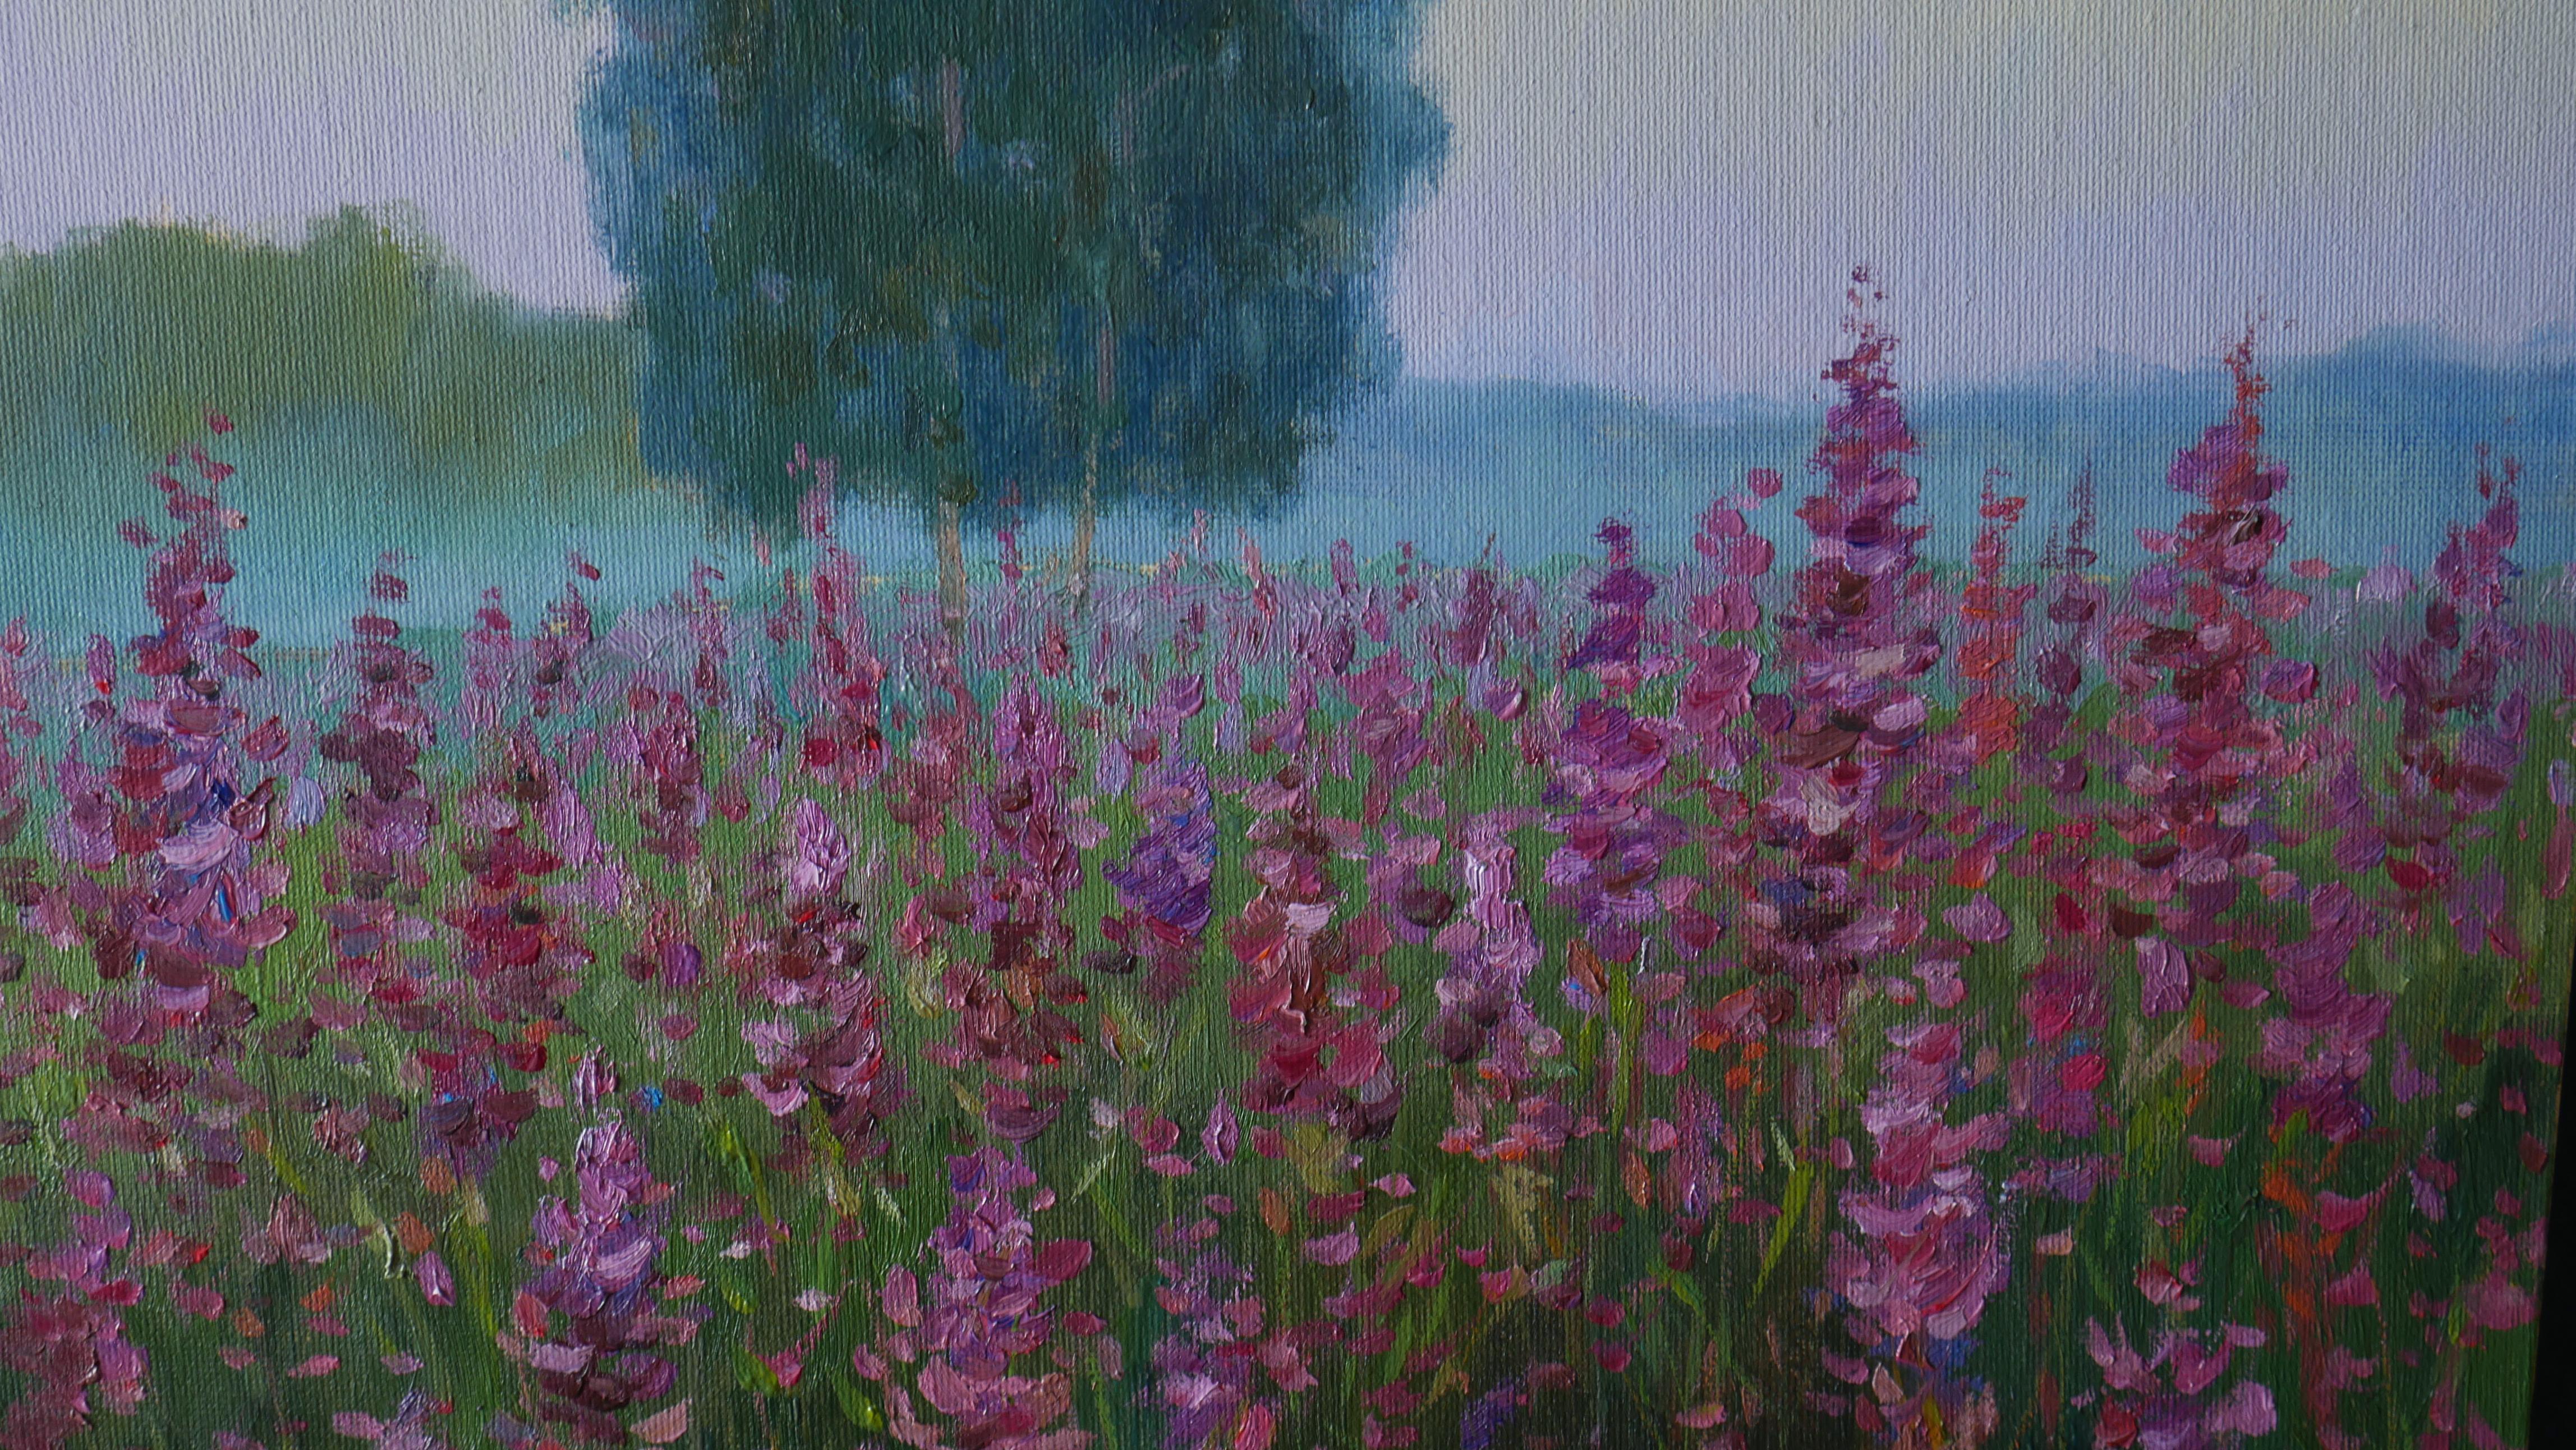 The Morning Over The Fireweed Field - summer landscape painting For Sale 1